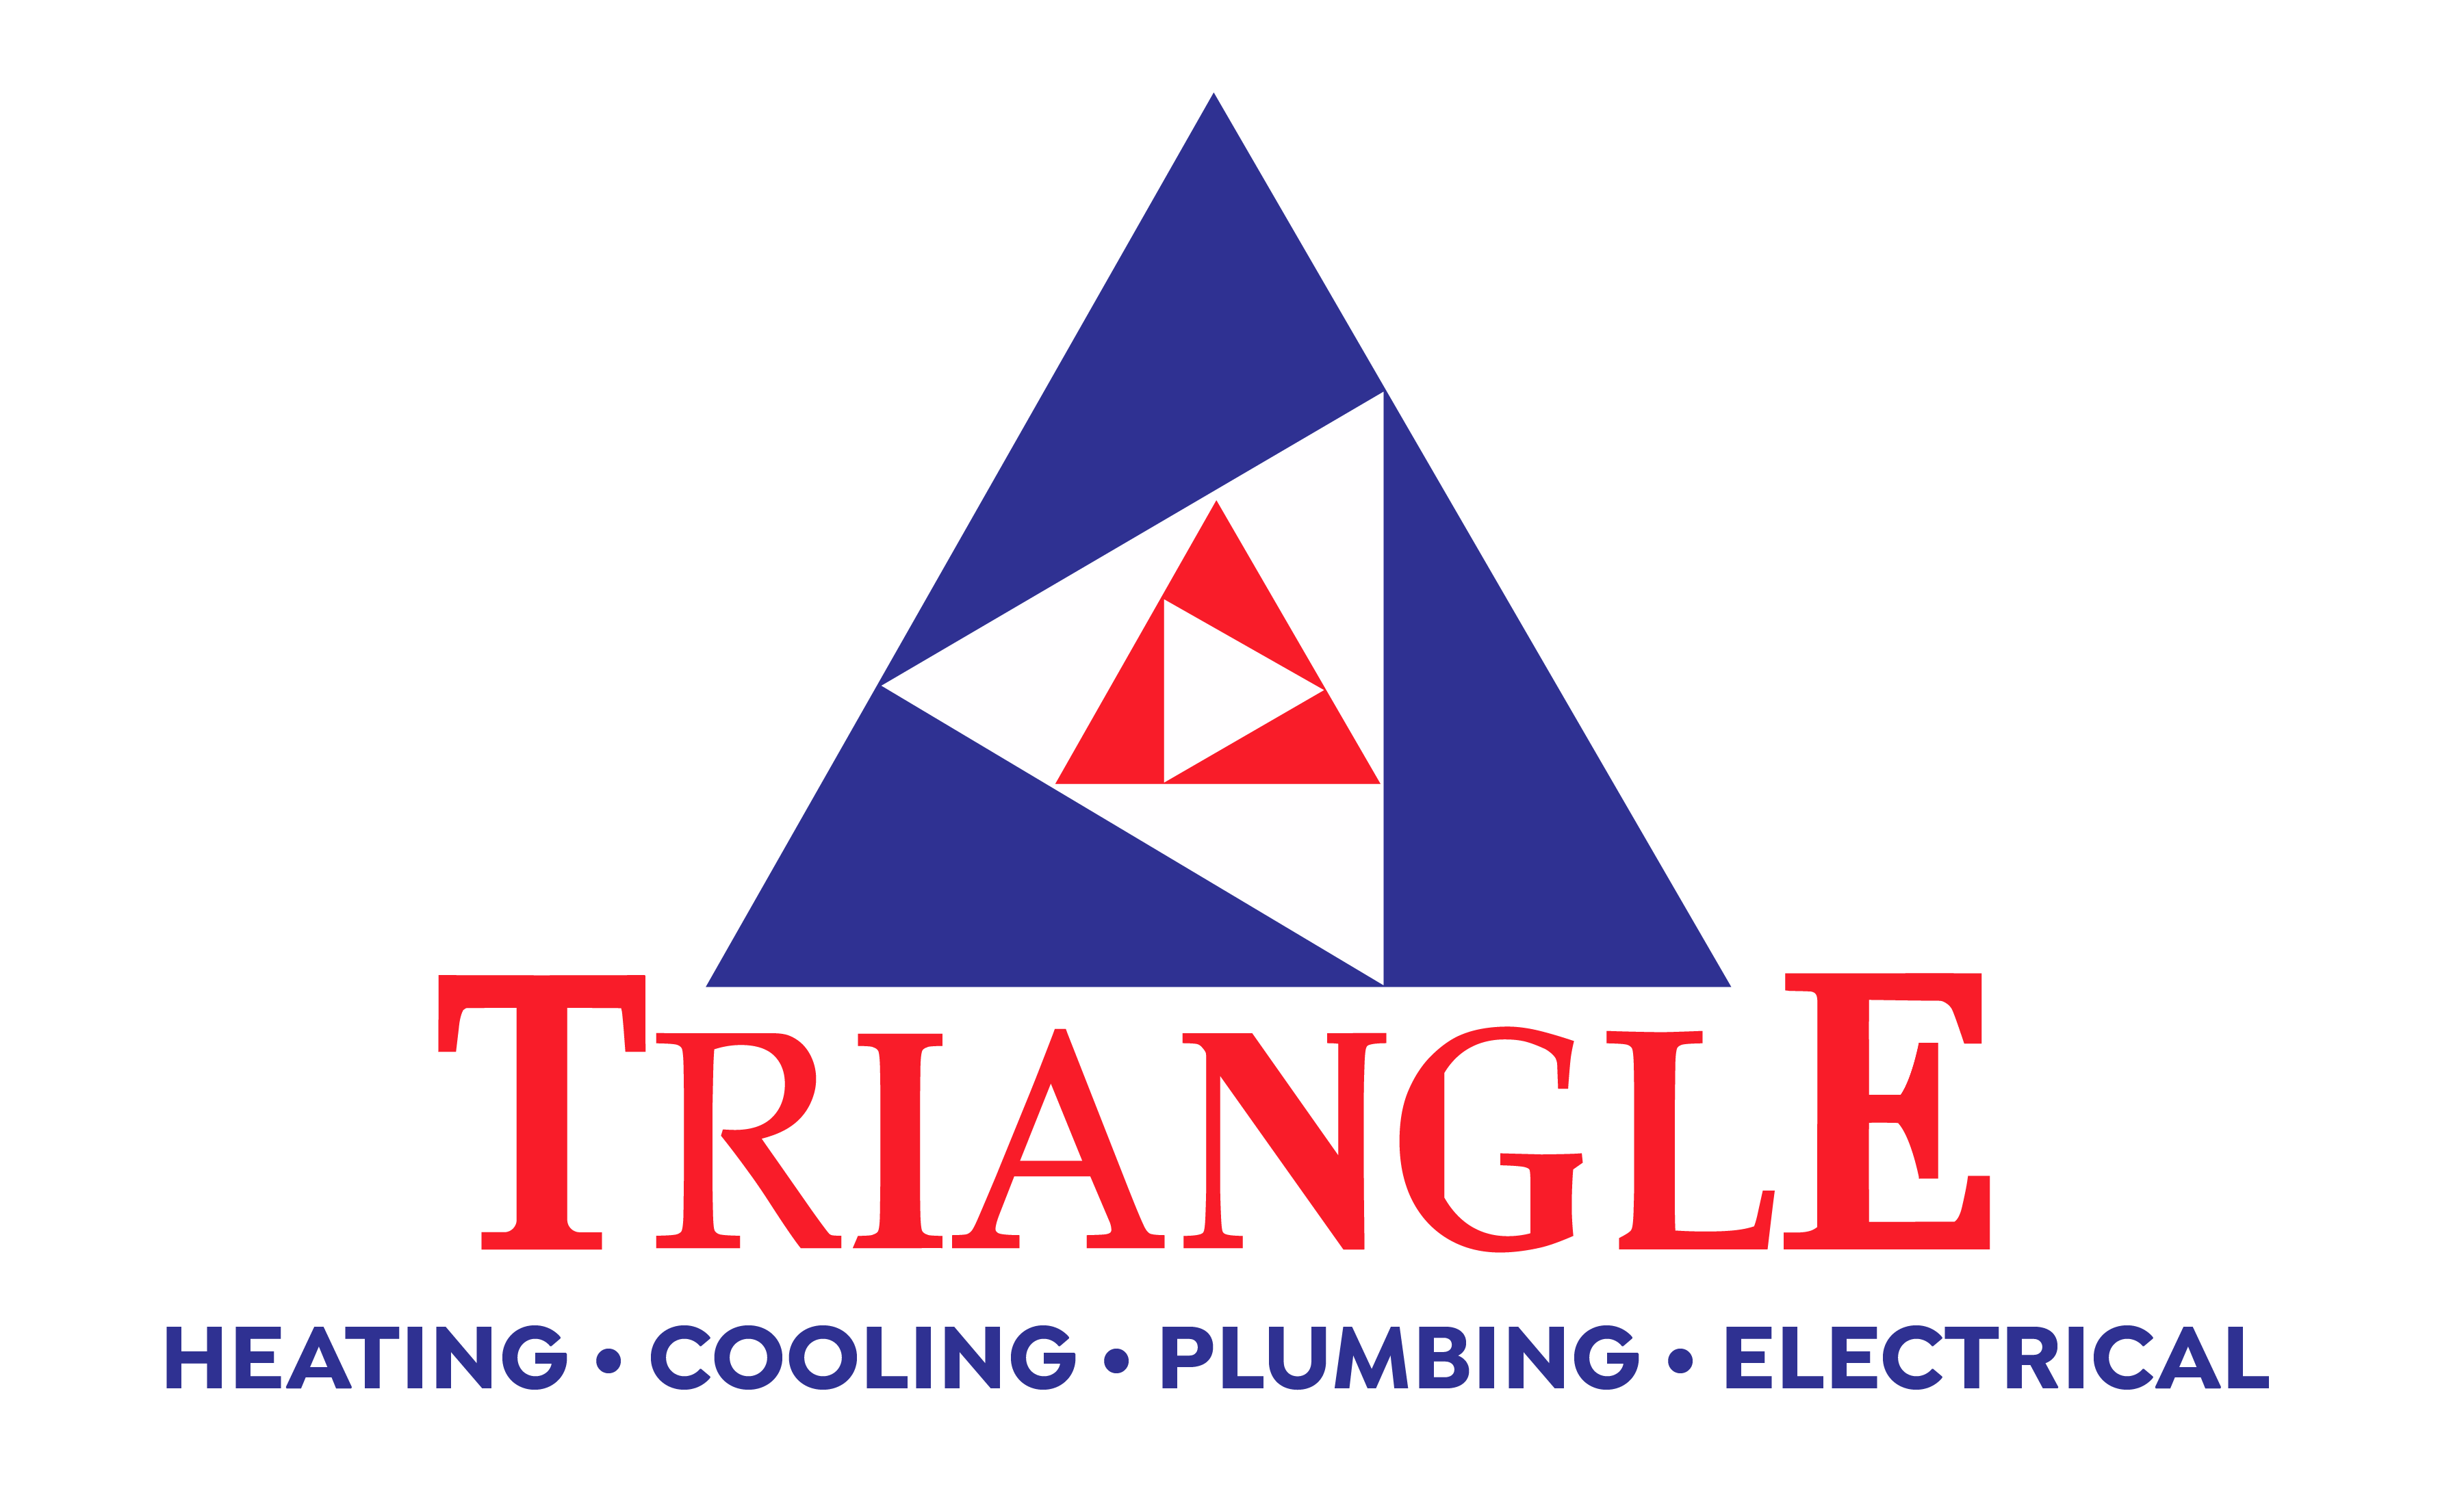 Triangle Heating, Cooling, Plumbing & Electrical logo